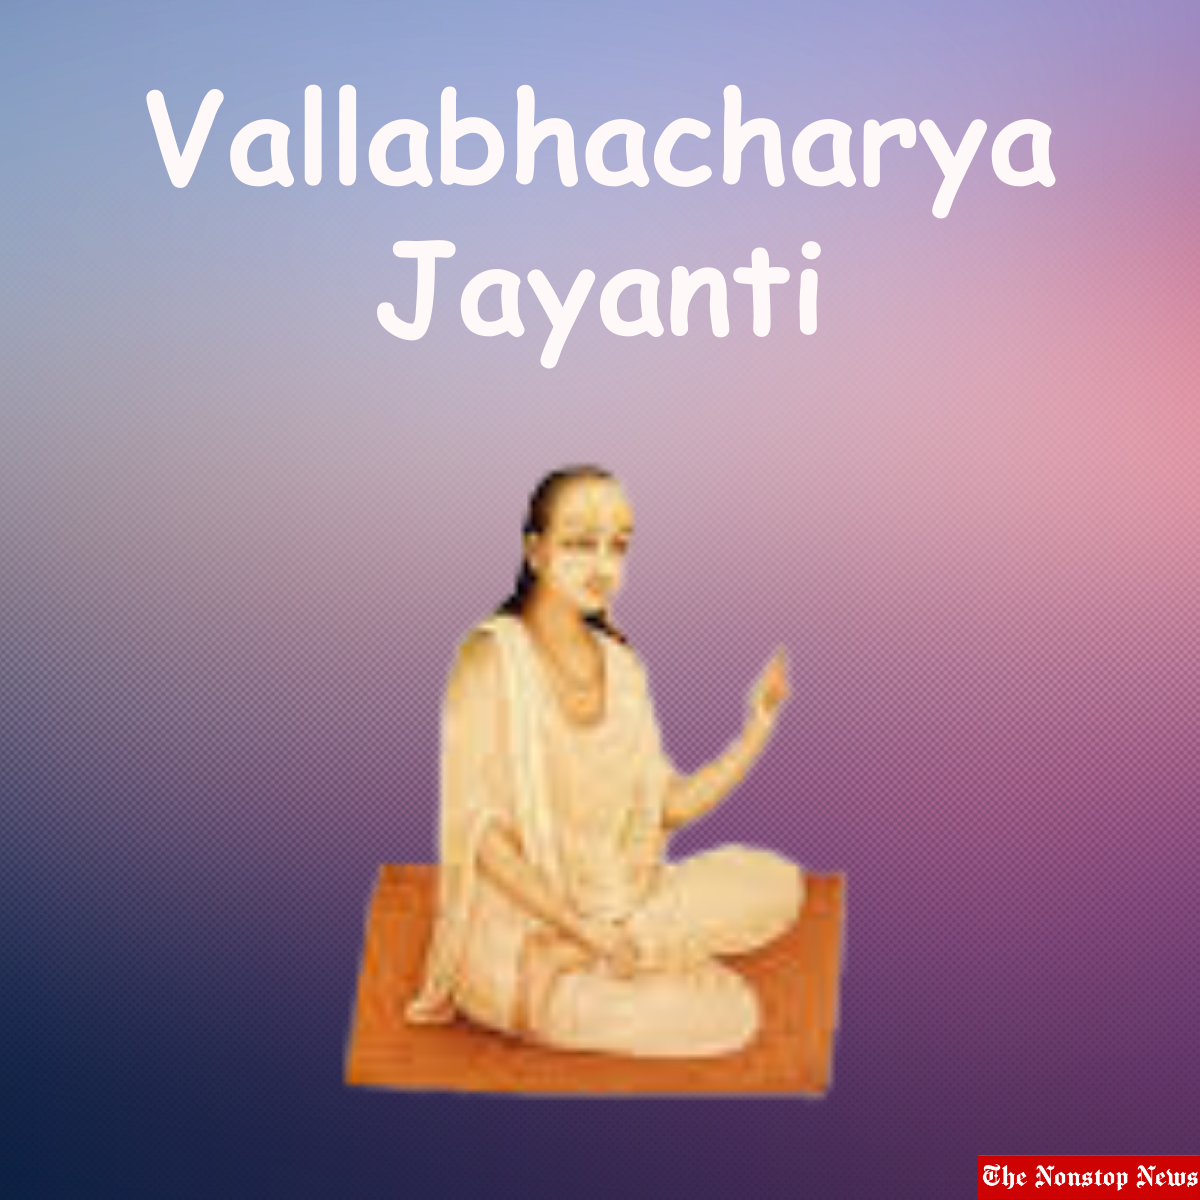 Vallabhacharya Jayanti 2023 Images, Messages, Greetings, Quotes, Wishes, Sayings, Posters, Banners, Captions, and Cliparts